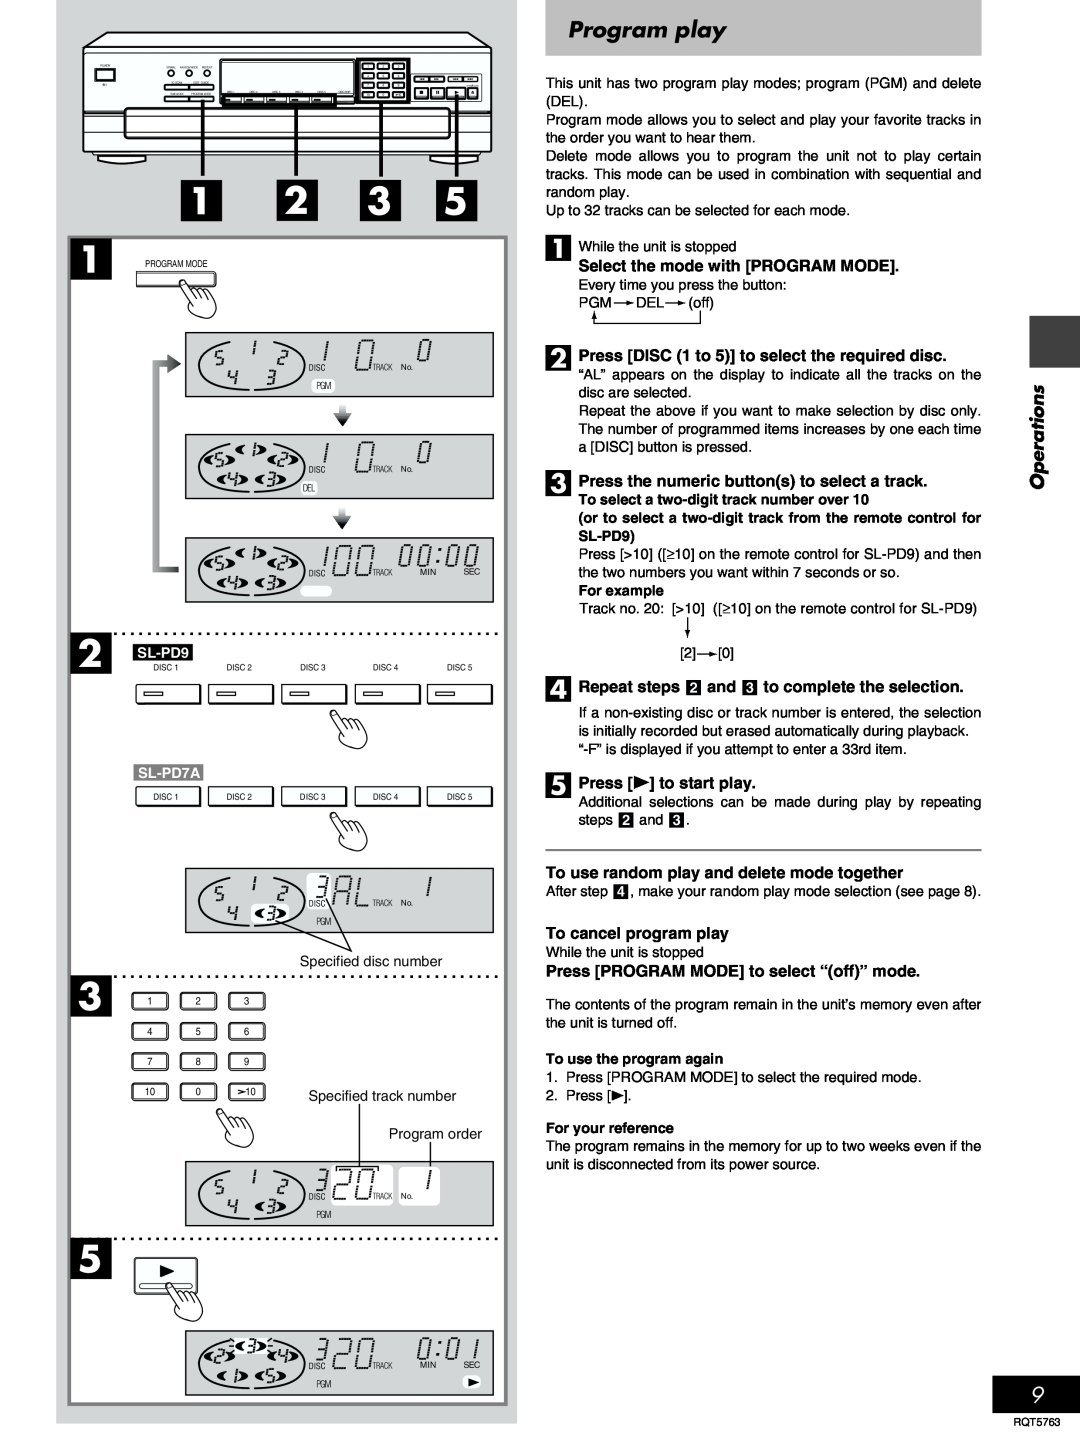 Panasonic SL-PD7A Program play, Operations, Select the mode with PROGRAM MODE, Press the numeric buttons to select a track 